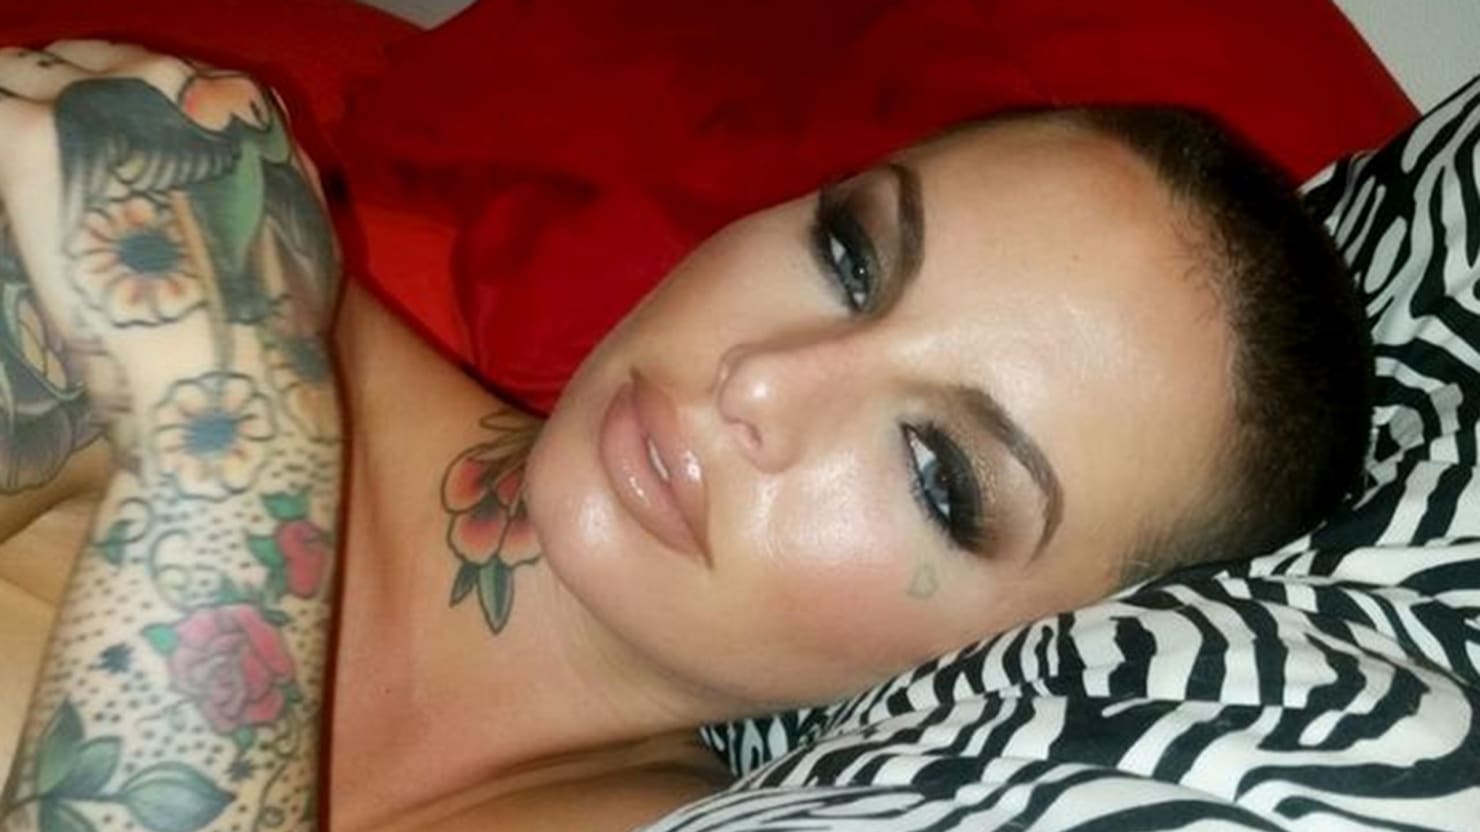 corey roland add christy mack porn pictures photo